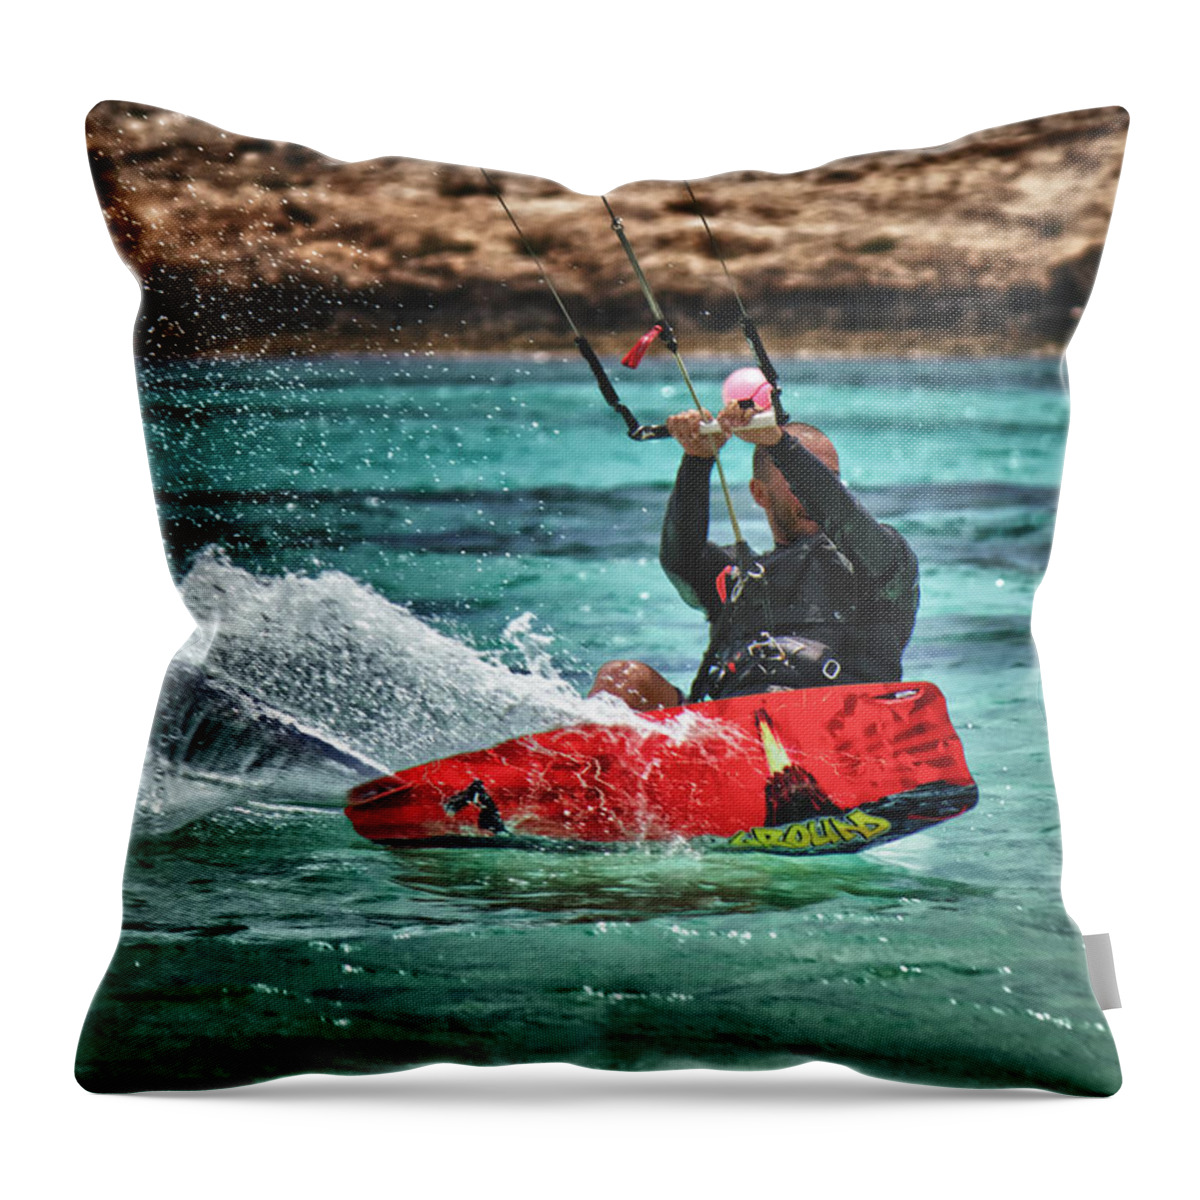 Action Throw Pillow featuring the photograph Kitesurfer by Stelios Kleanthous